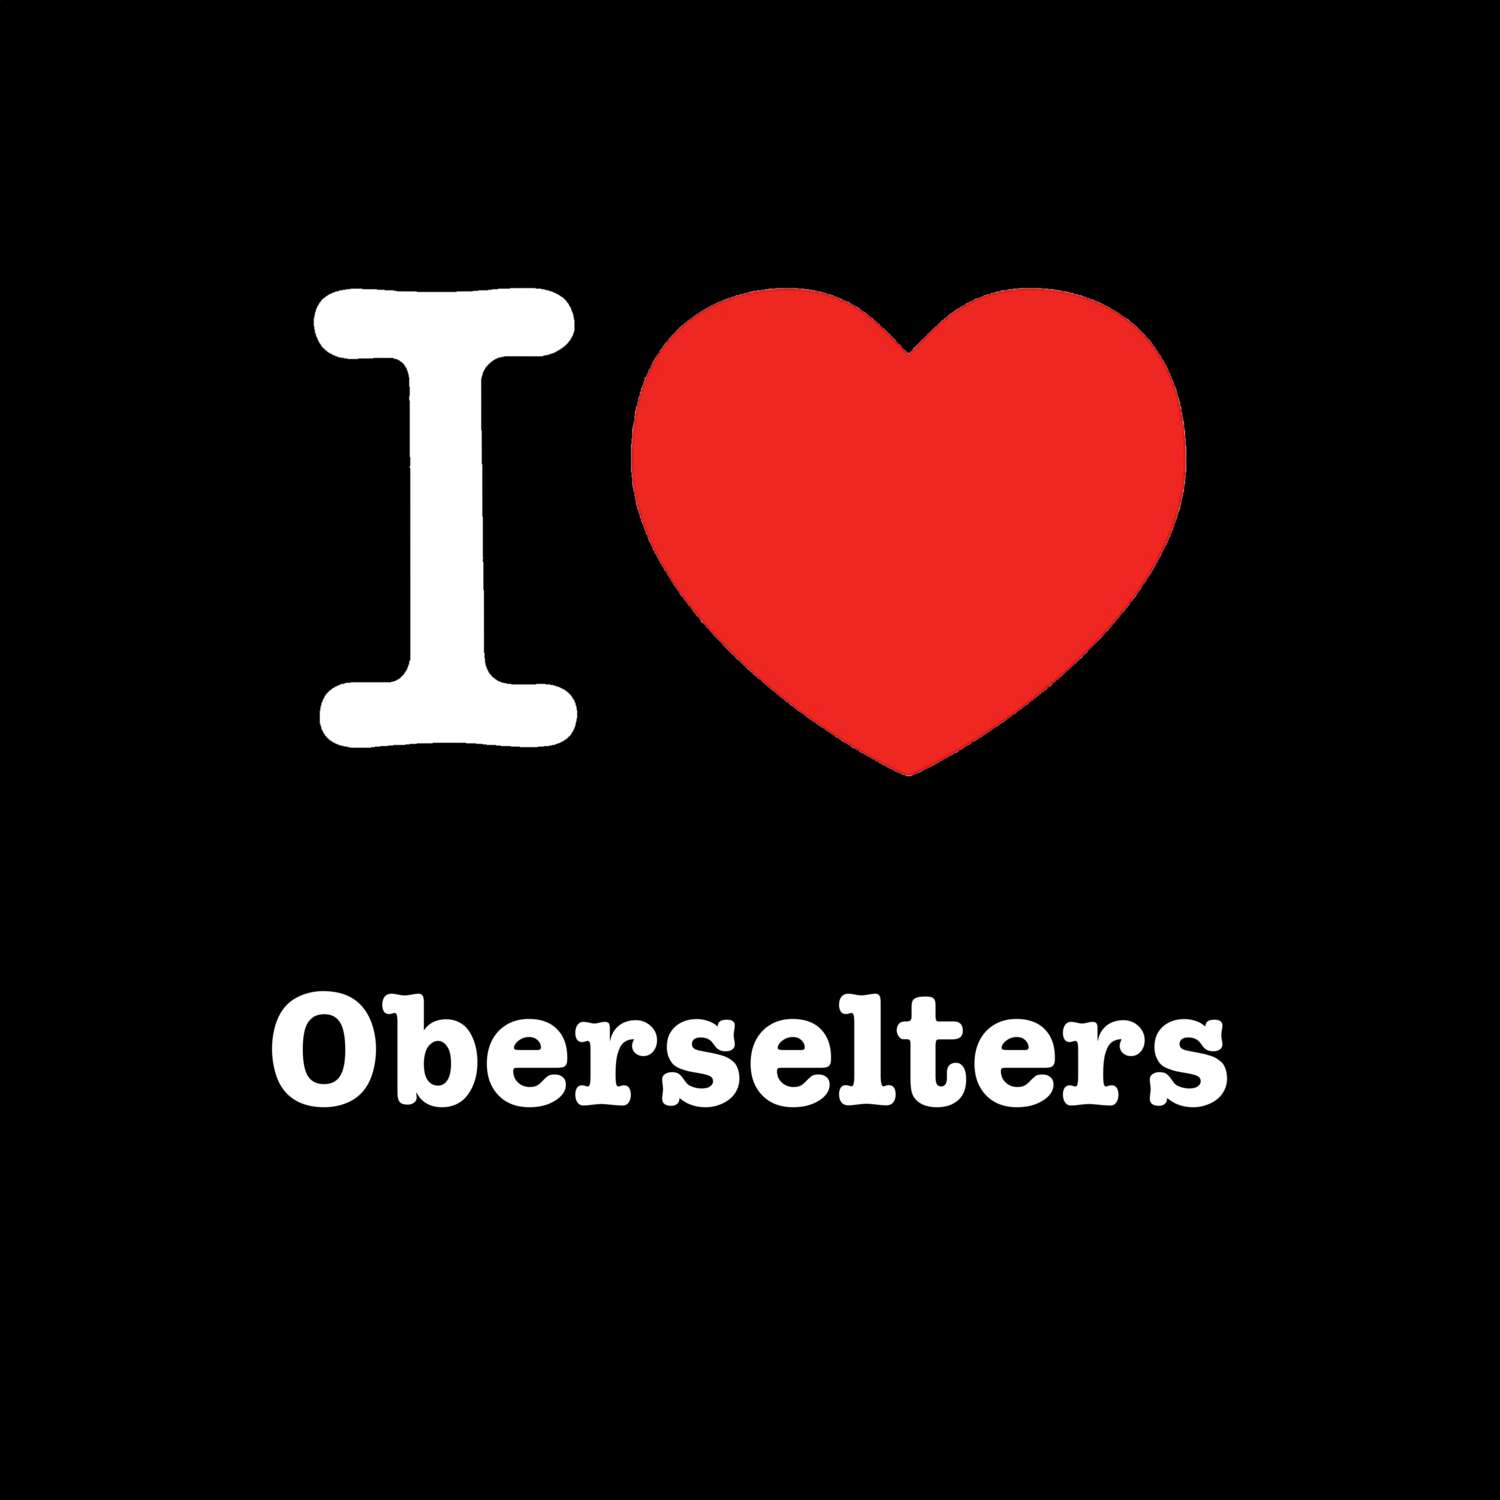 Oberselters T-Shirt »I love«